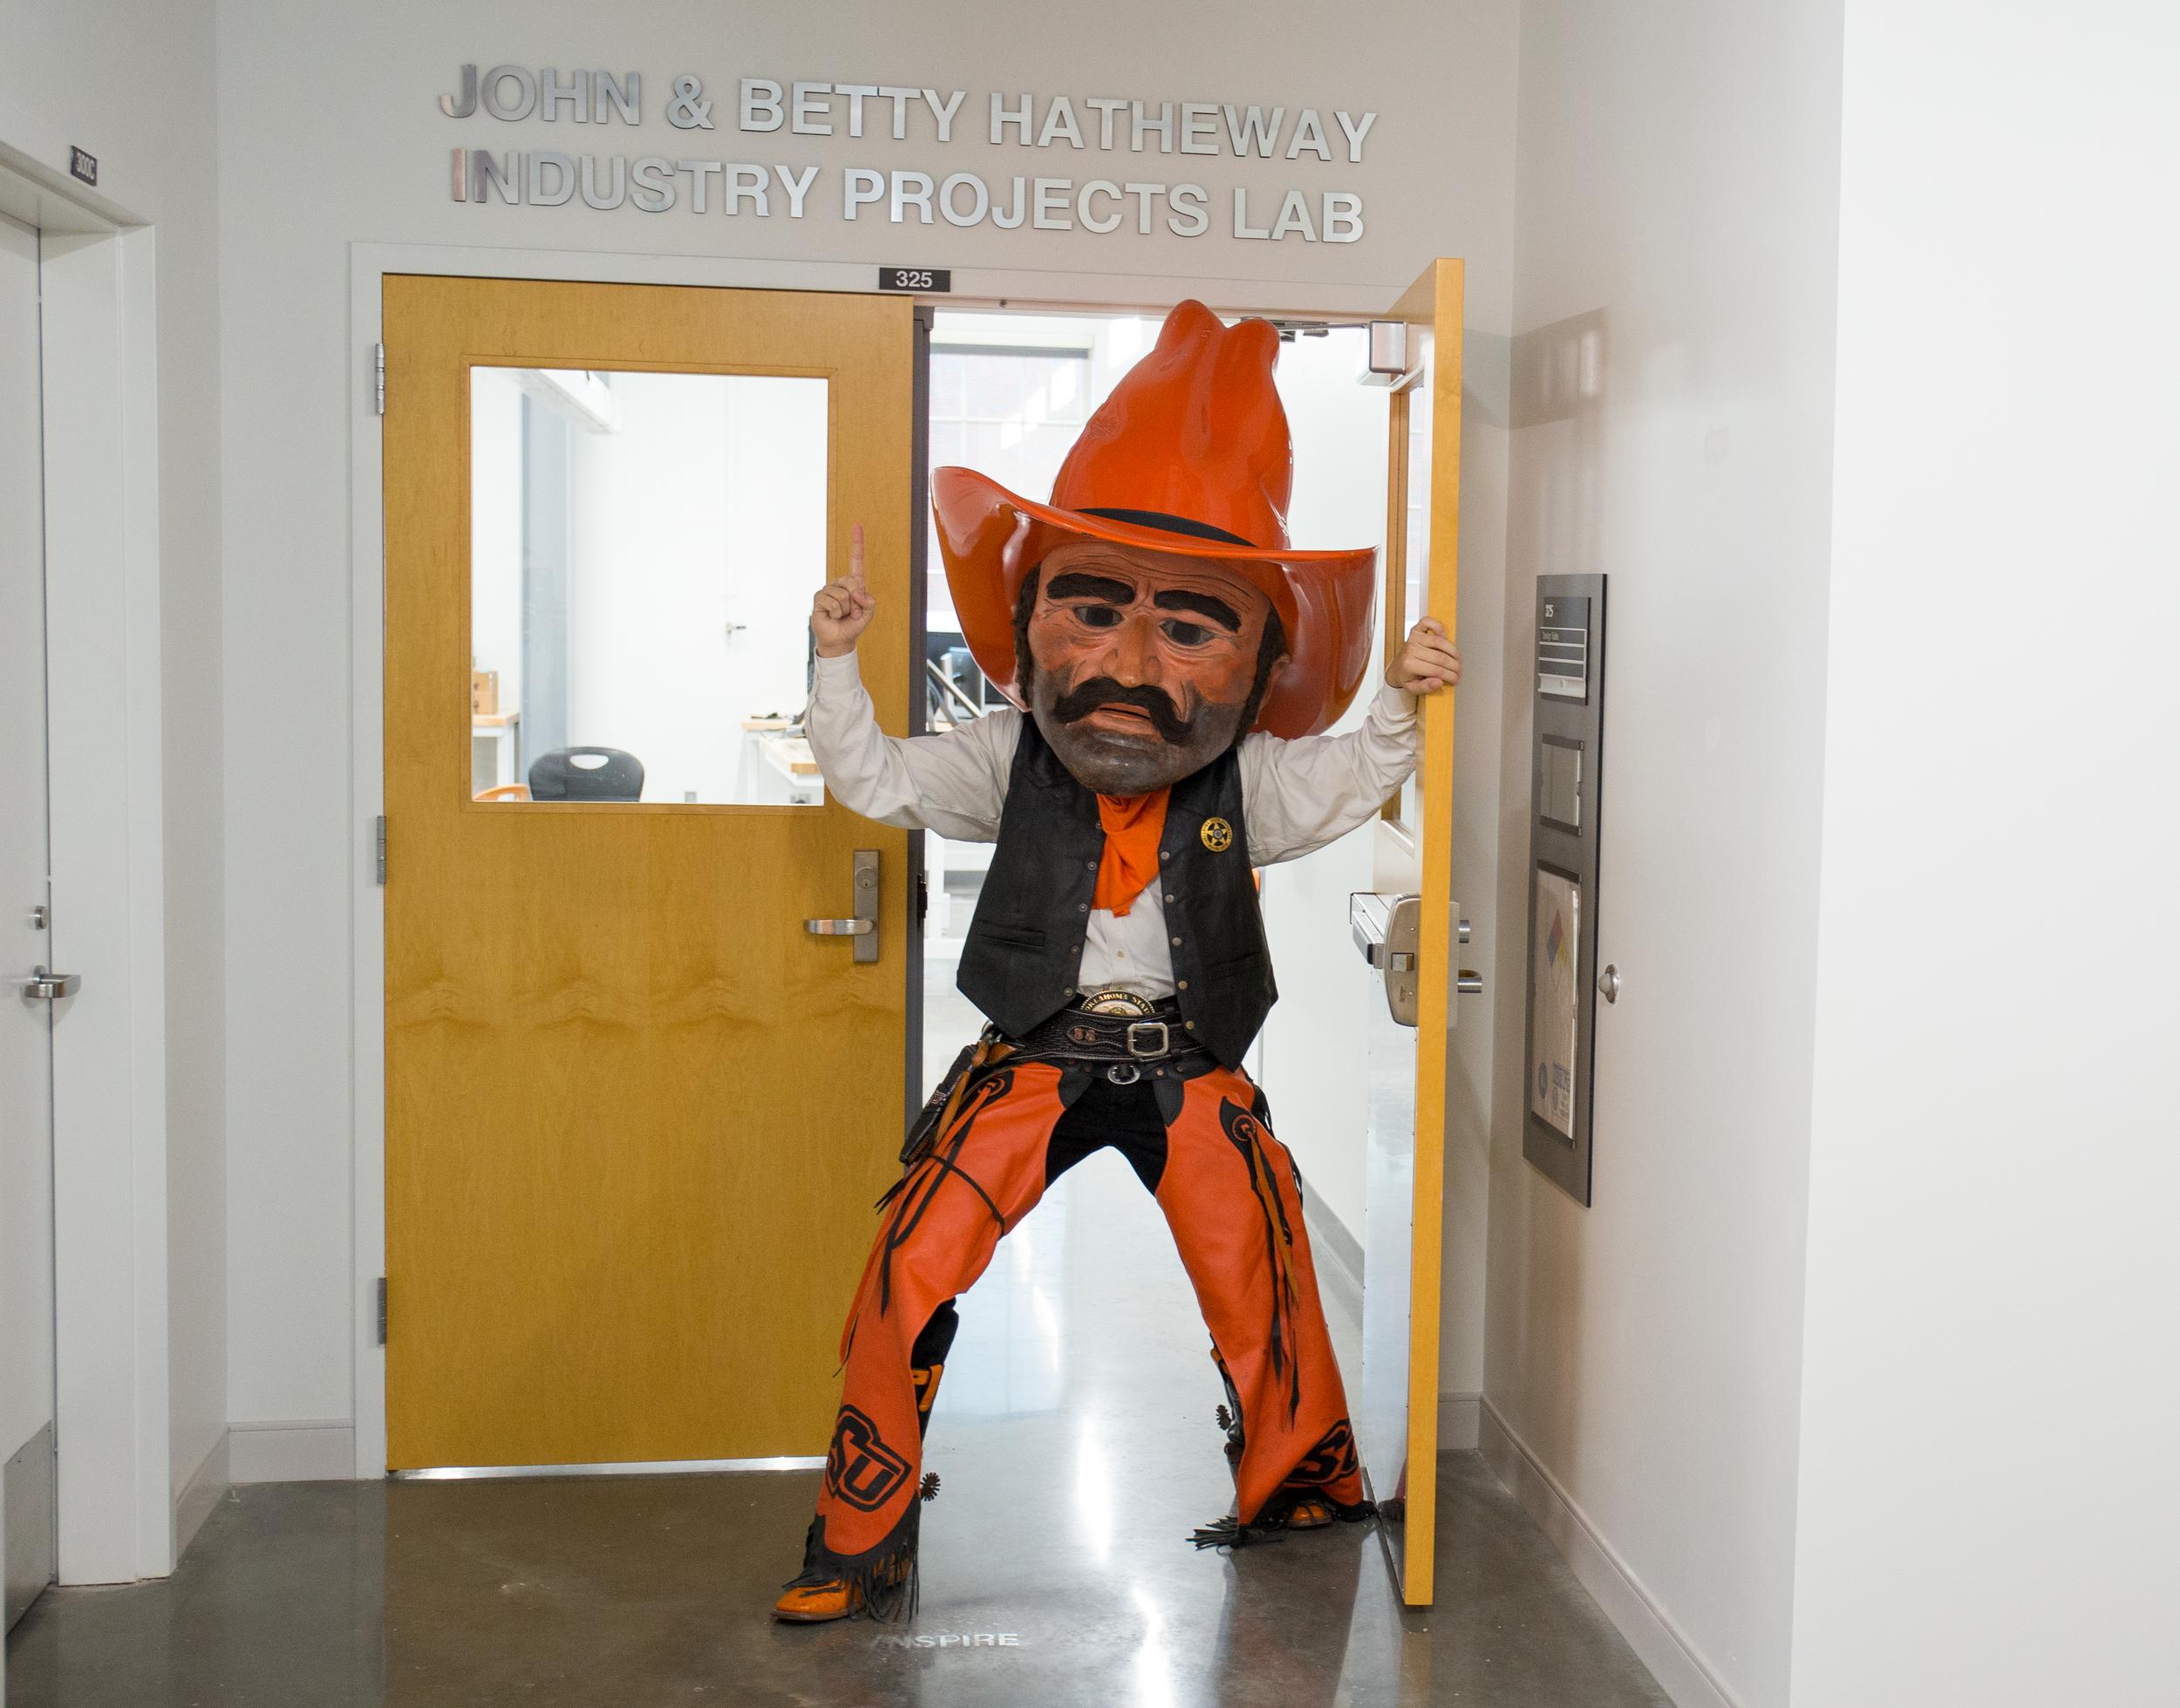 Pistol Pete walks through double doors while showing a number one gesture.